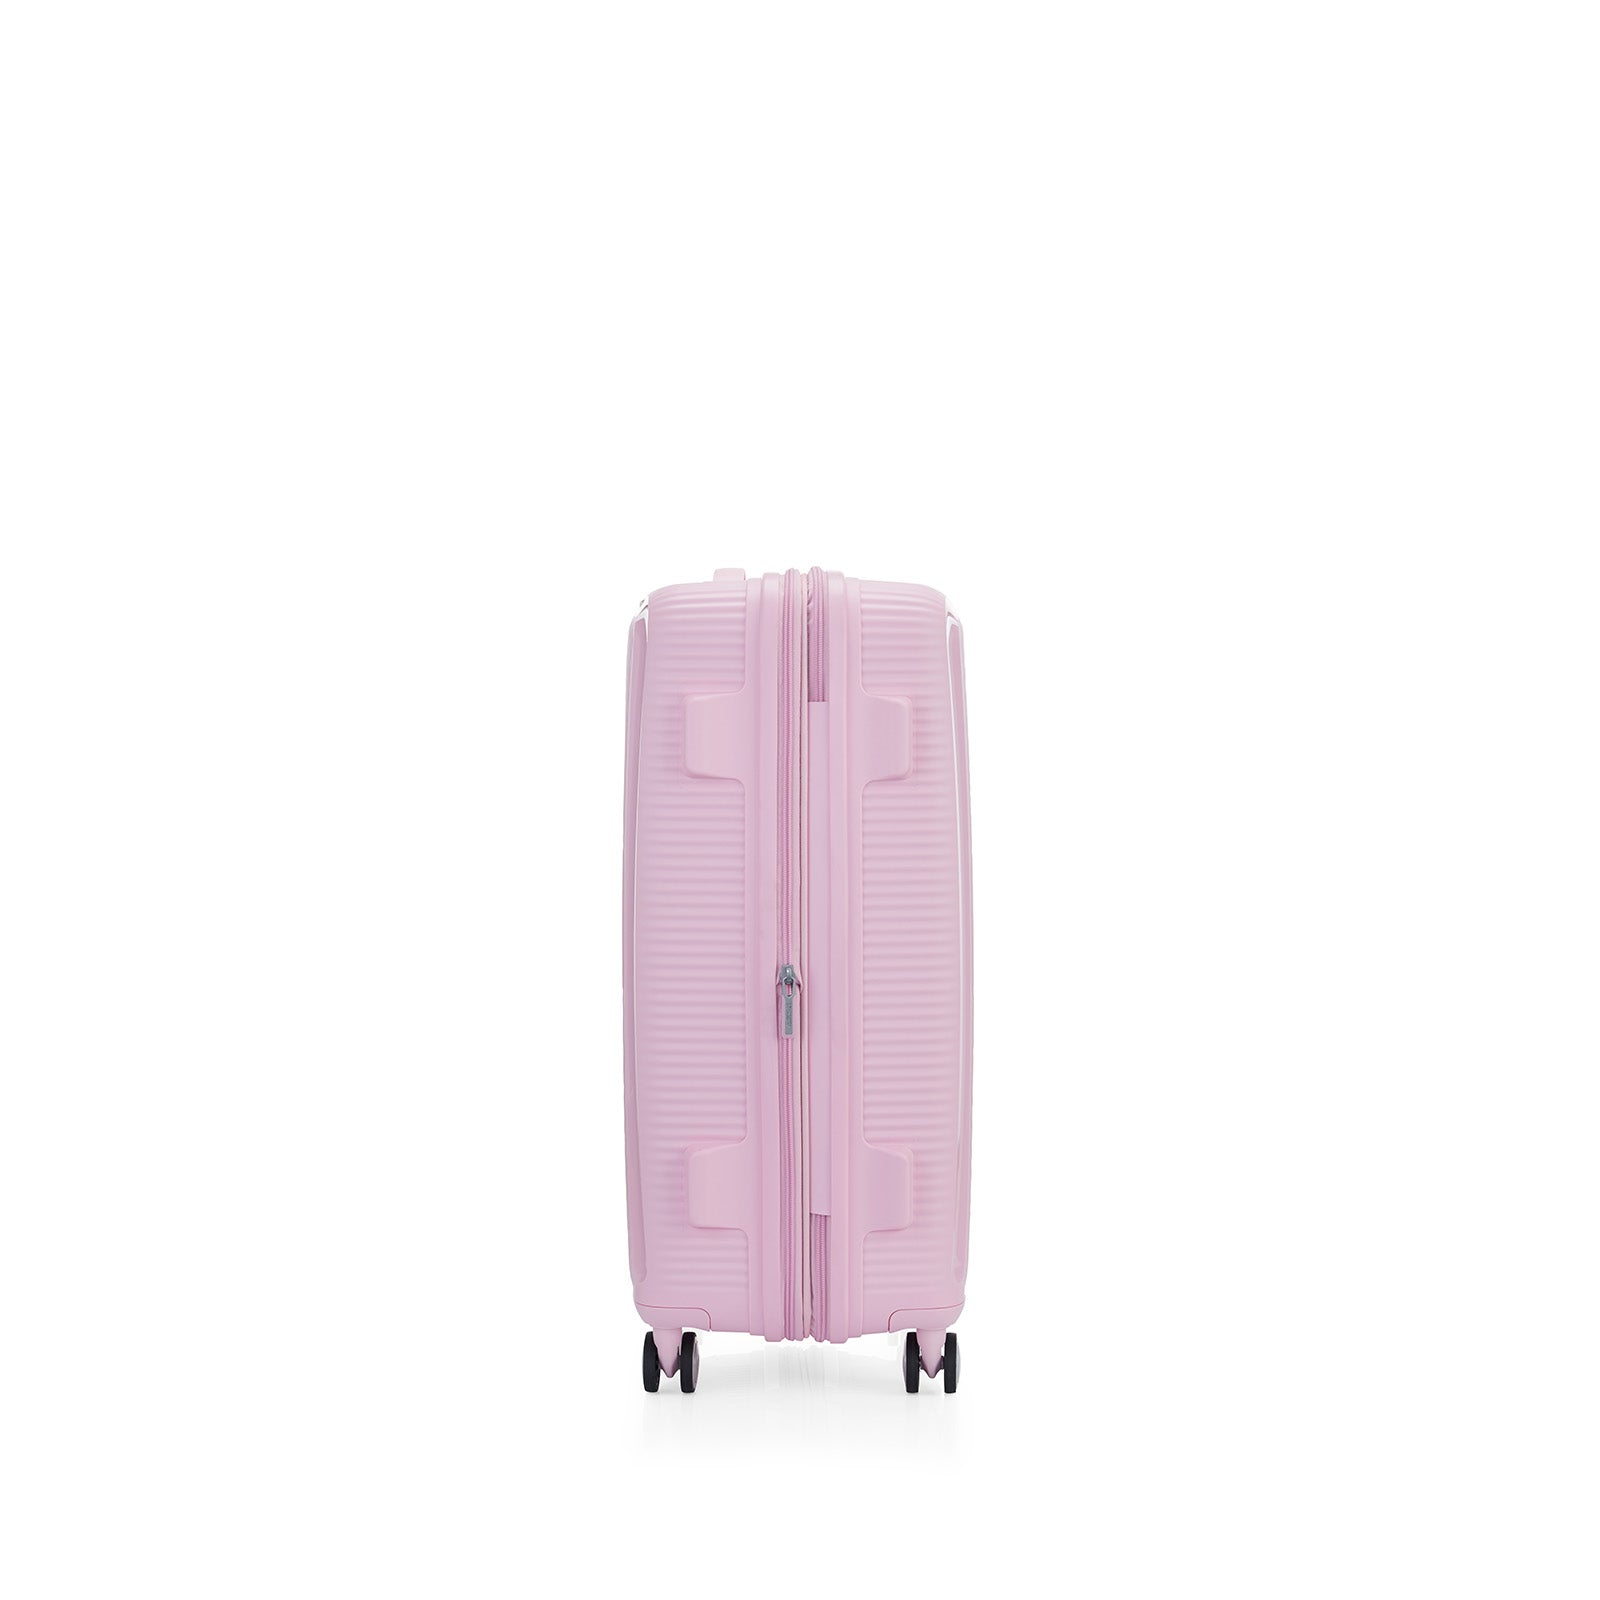 American-Tourister-Curio-2-69cm-Suitcase-Fresh-Pink-Side